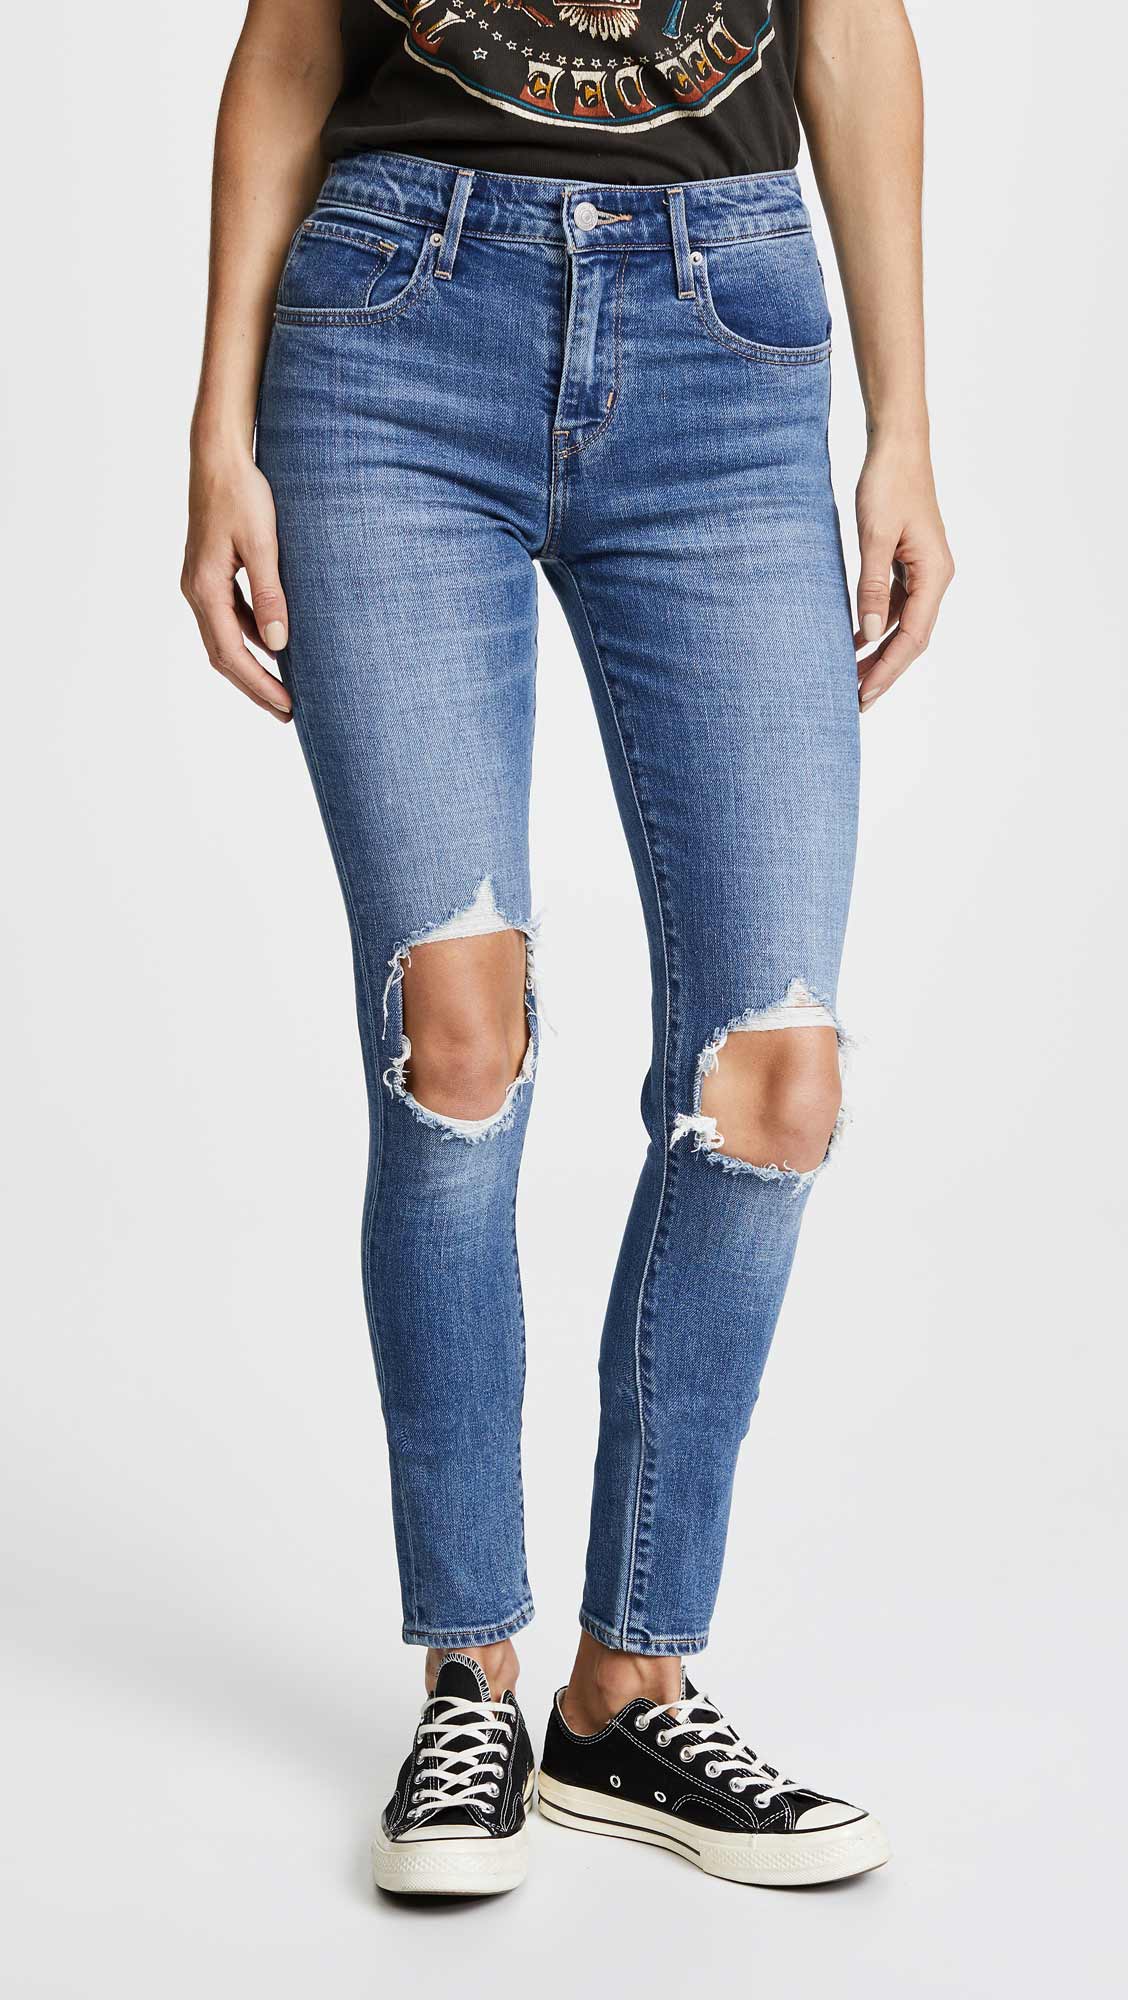 The 8 Best Levi's Jeans For Summer - THE JEANS BLOG